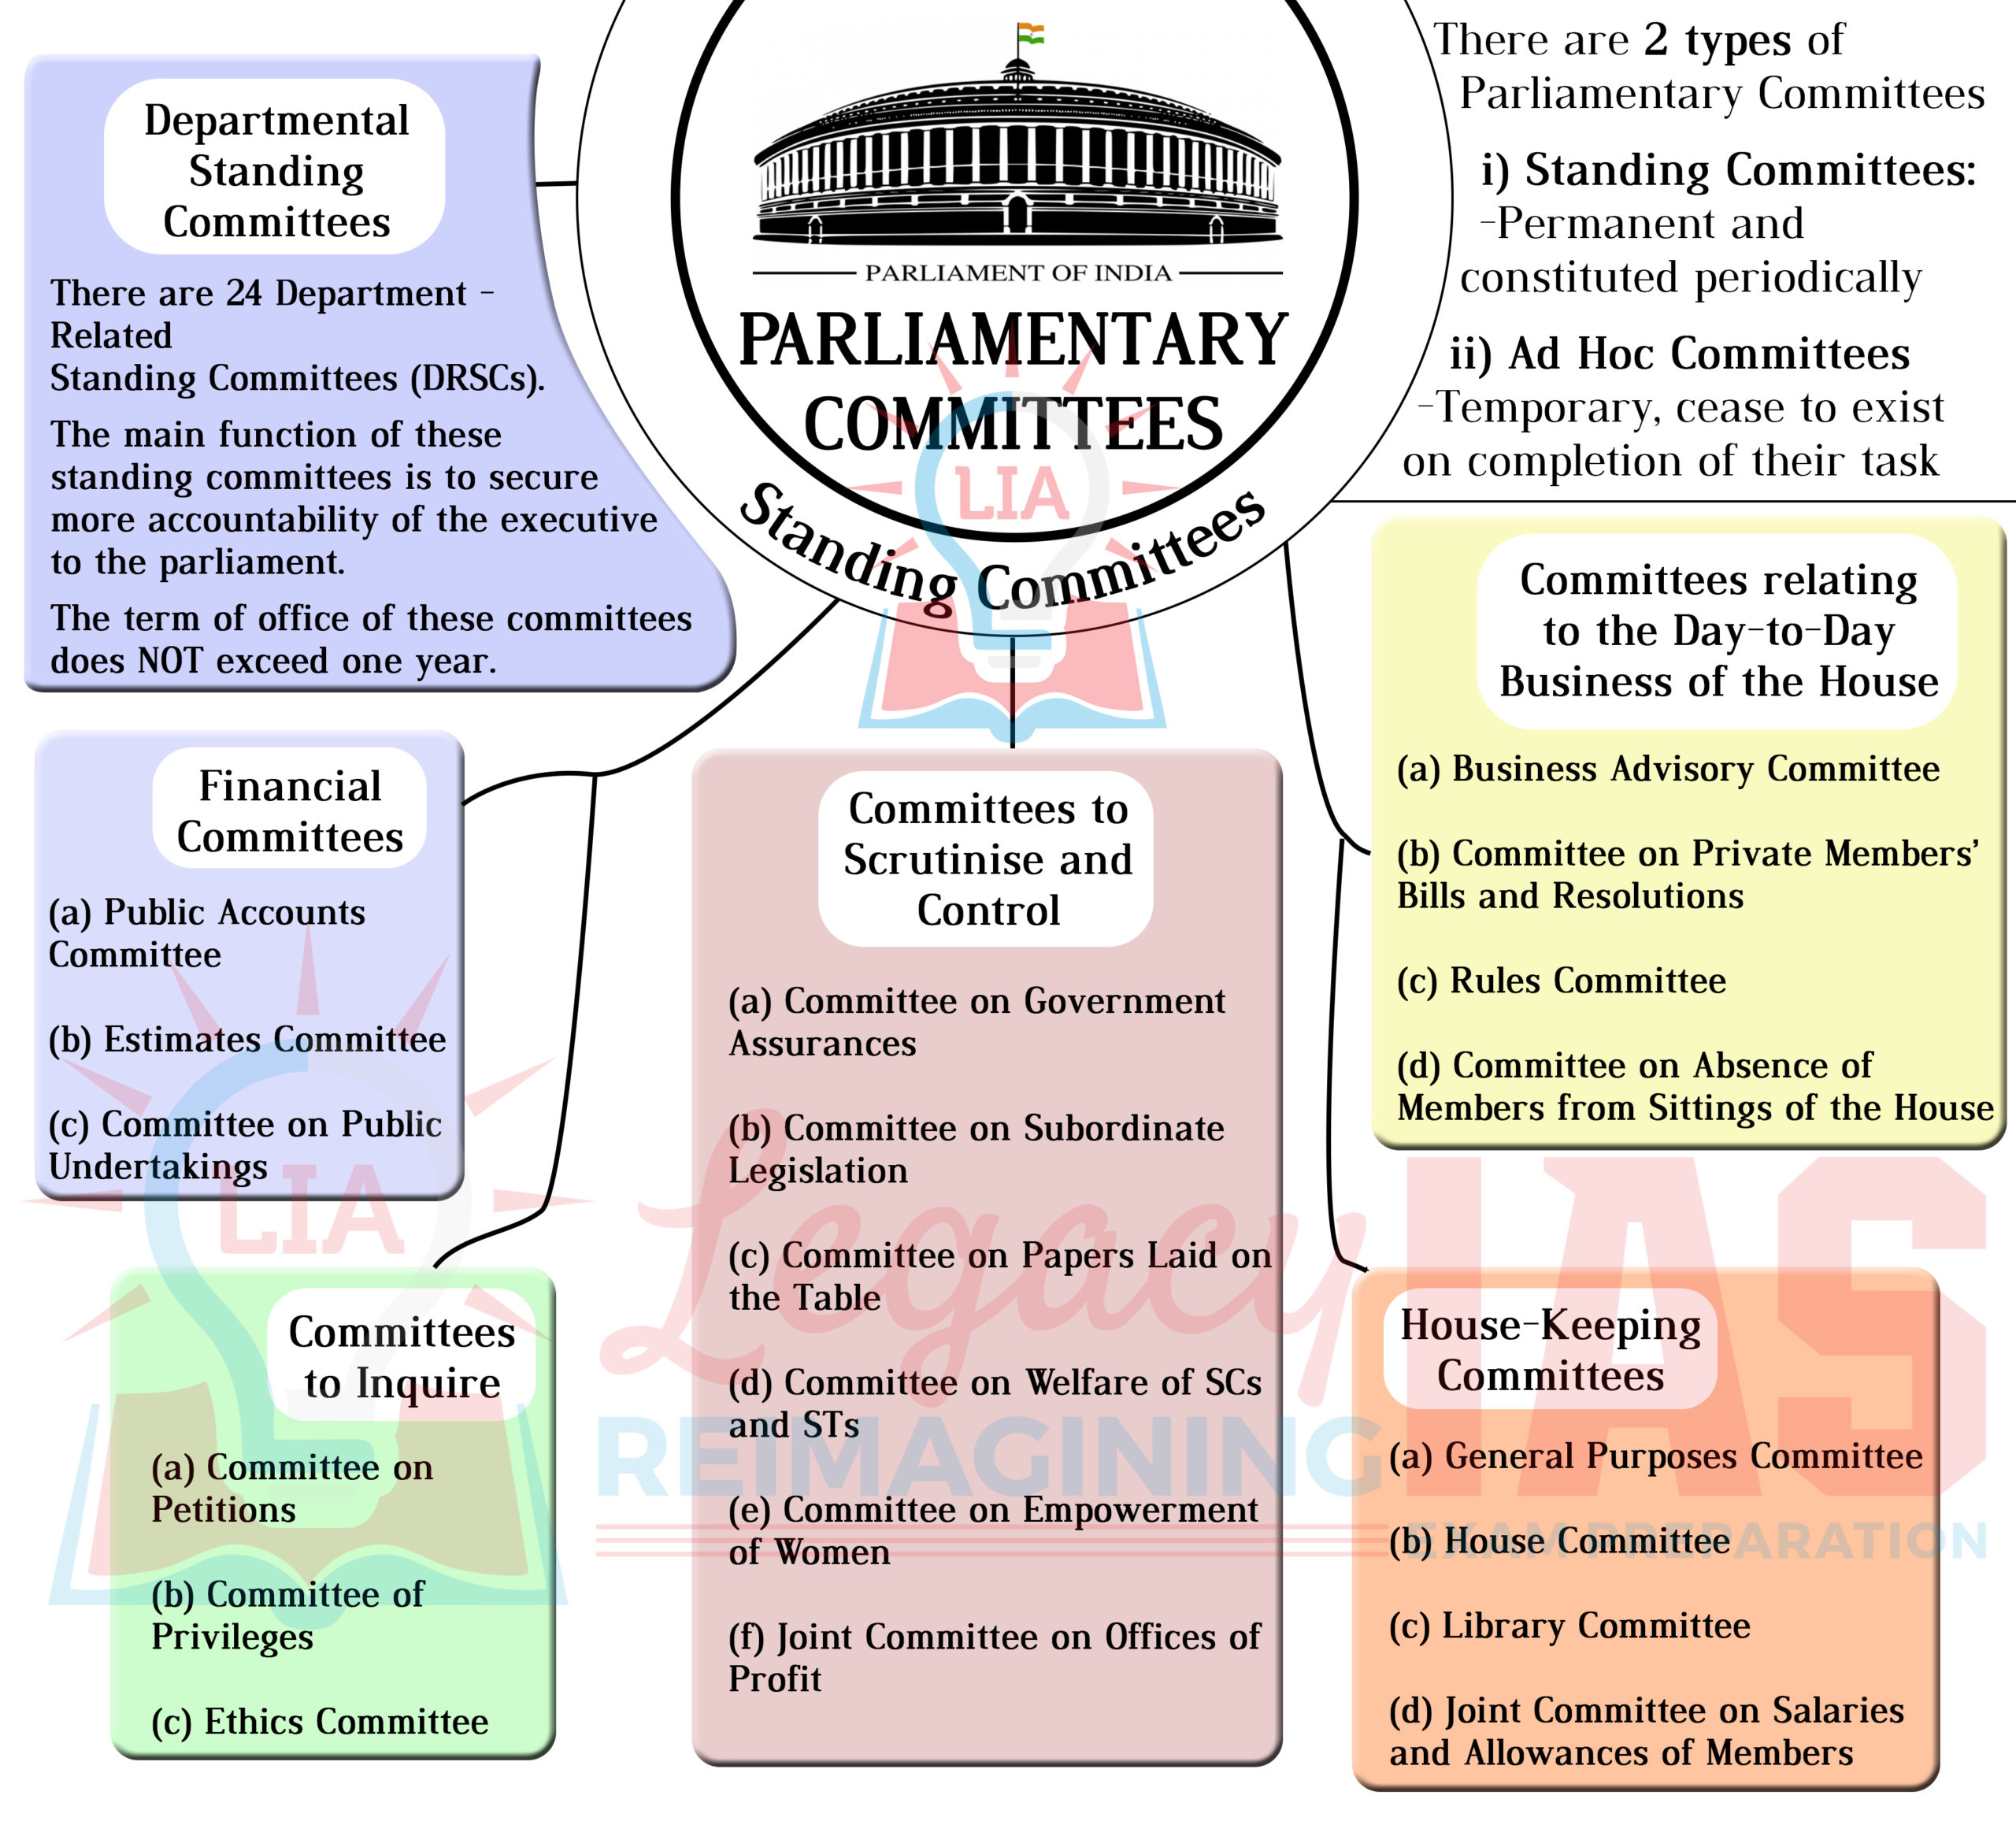 infographic-on-parliamentary-committees-in-india-legacy-ias-academy